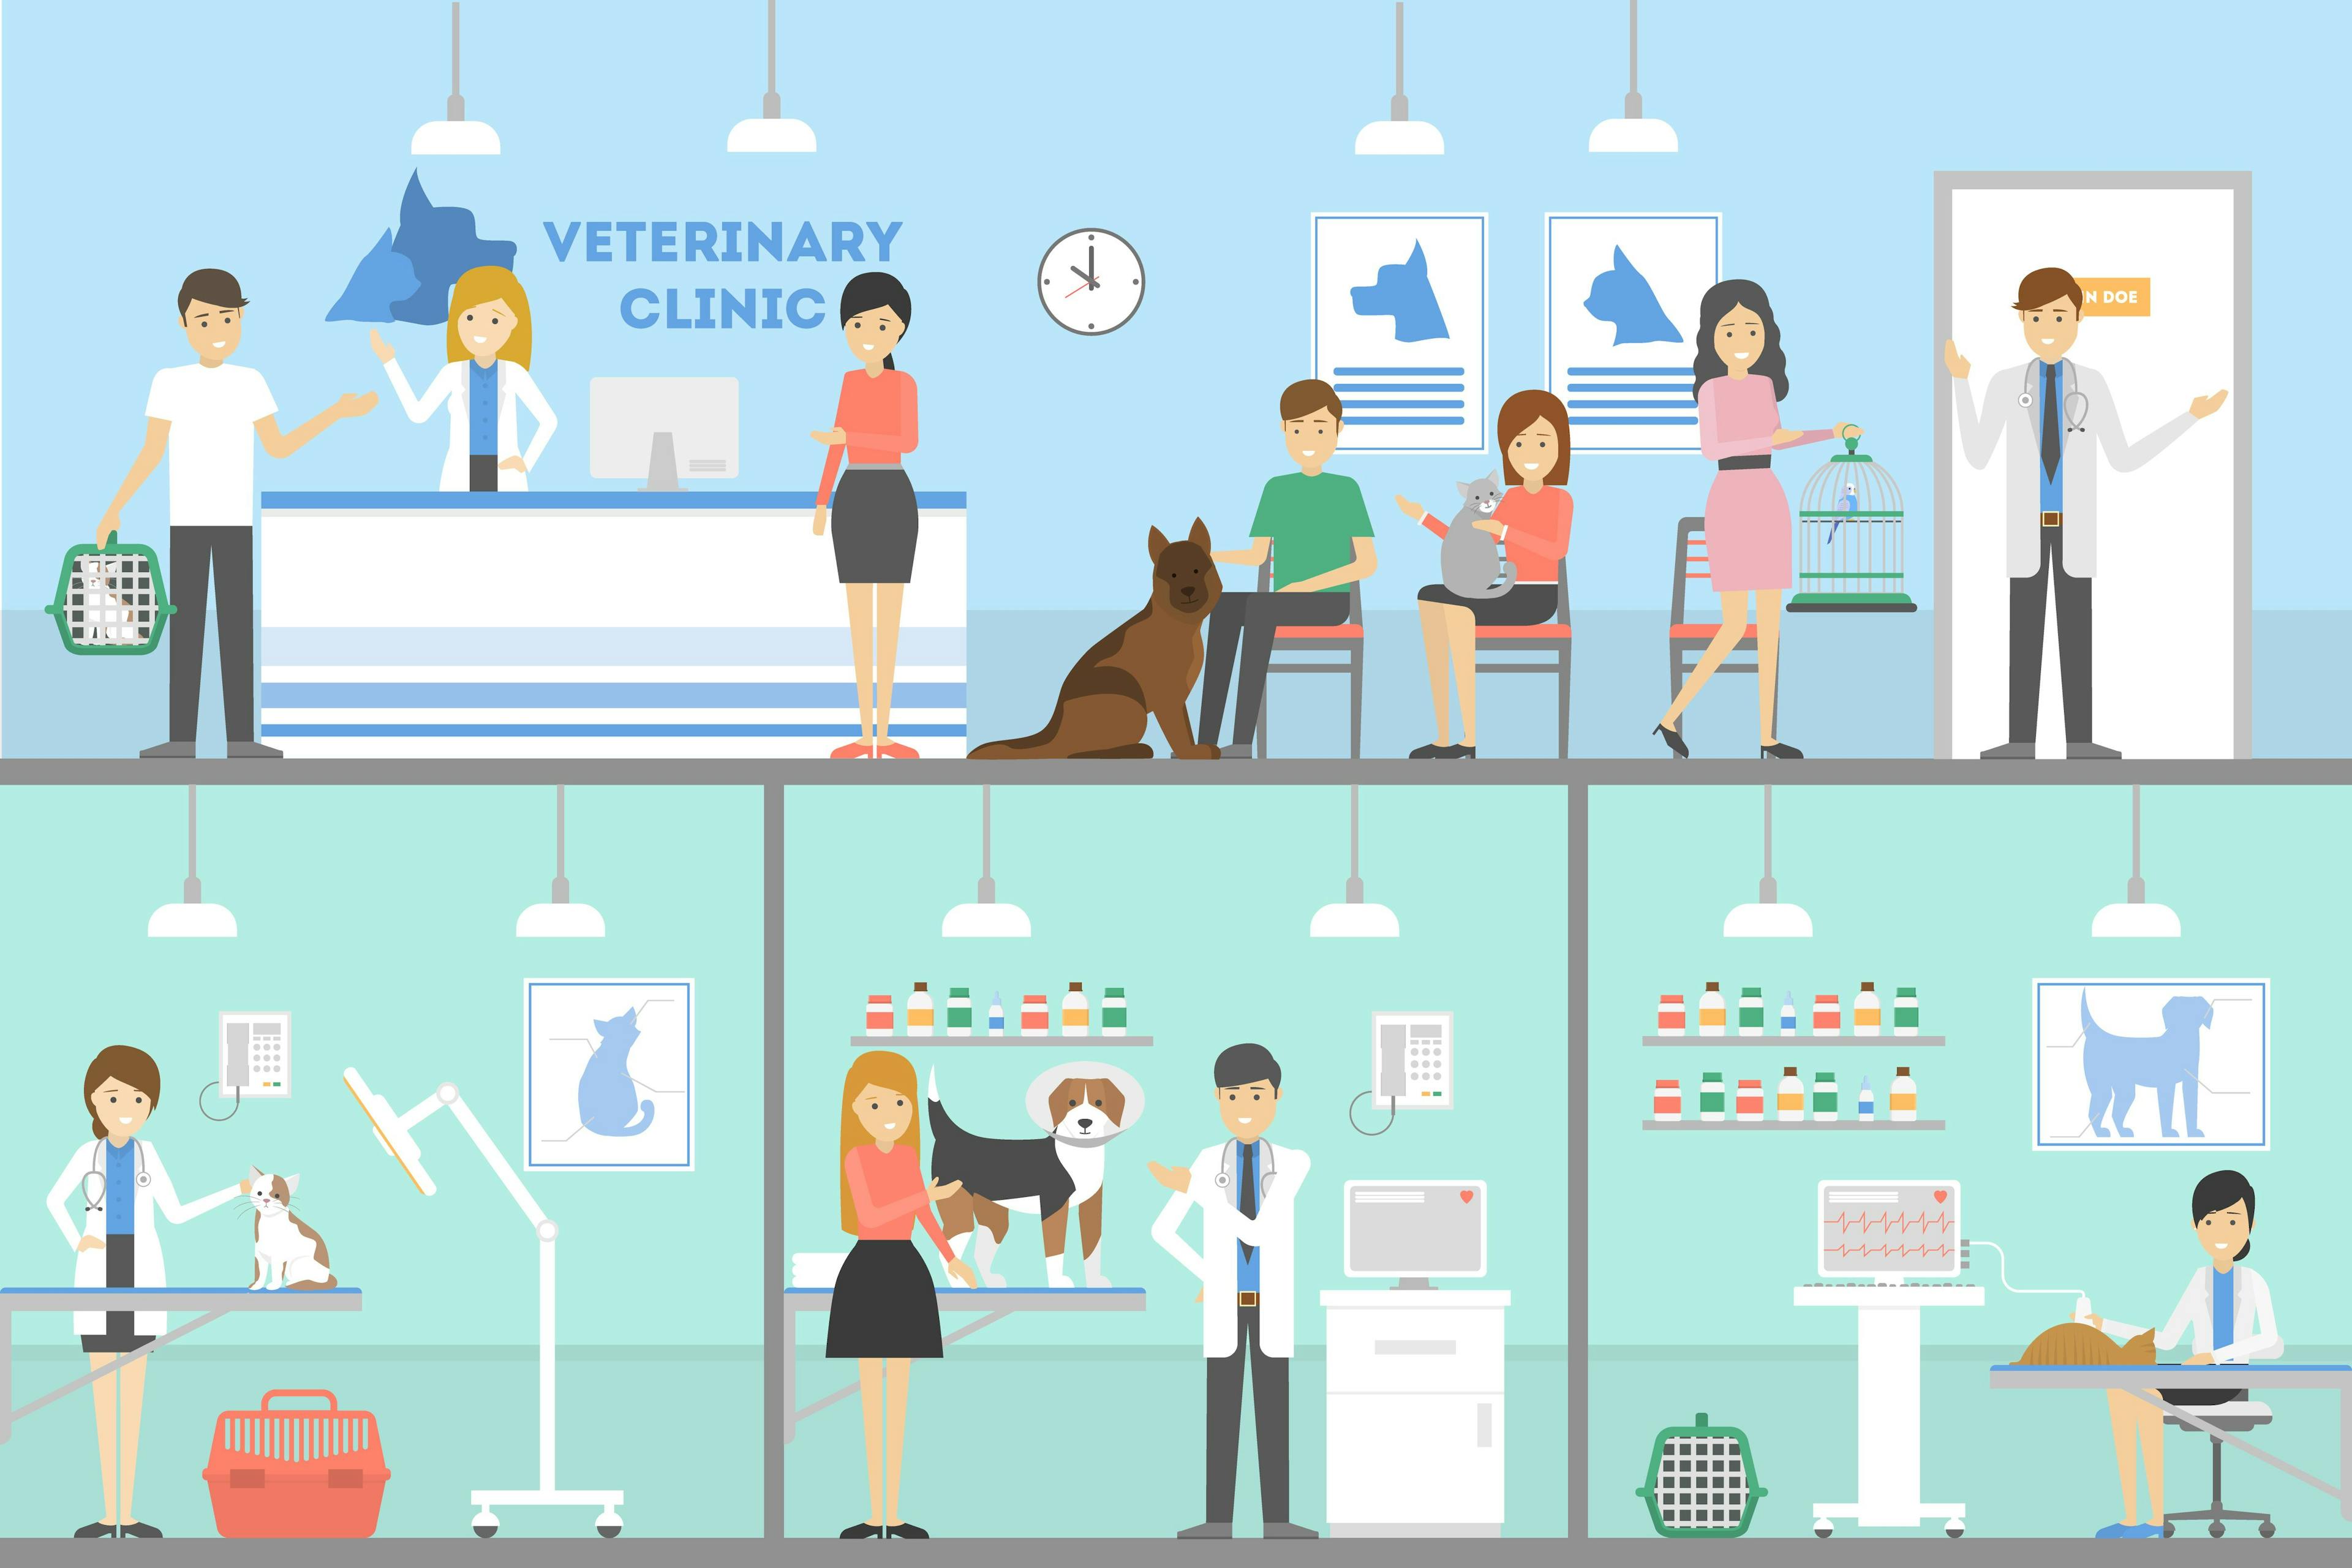 The ABCs of hospital design